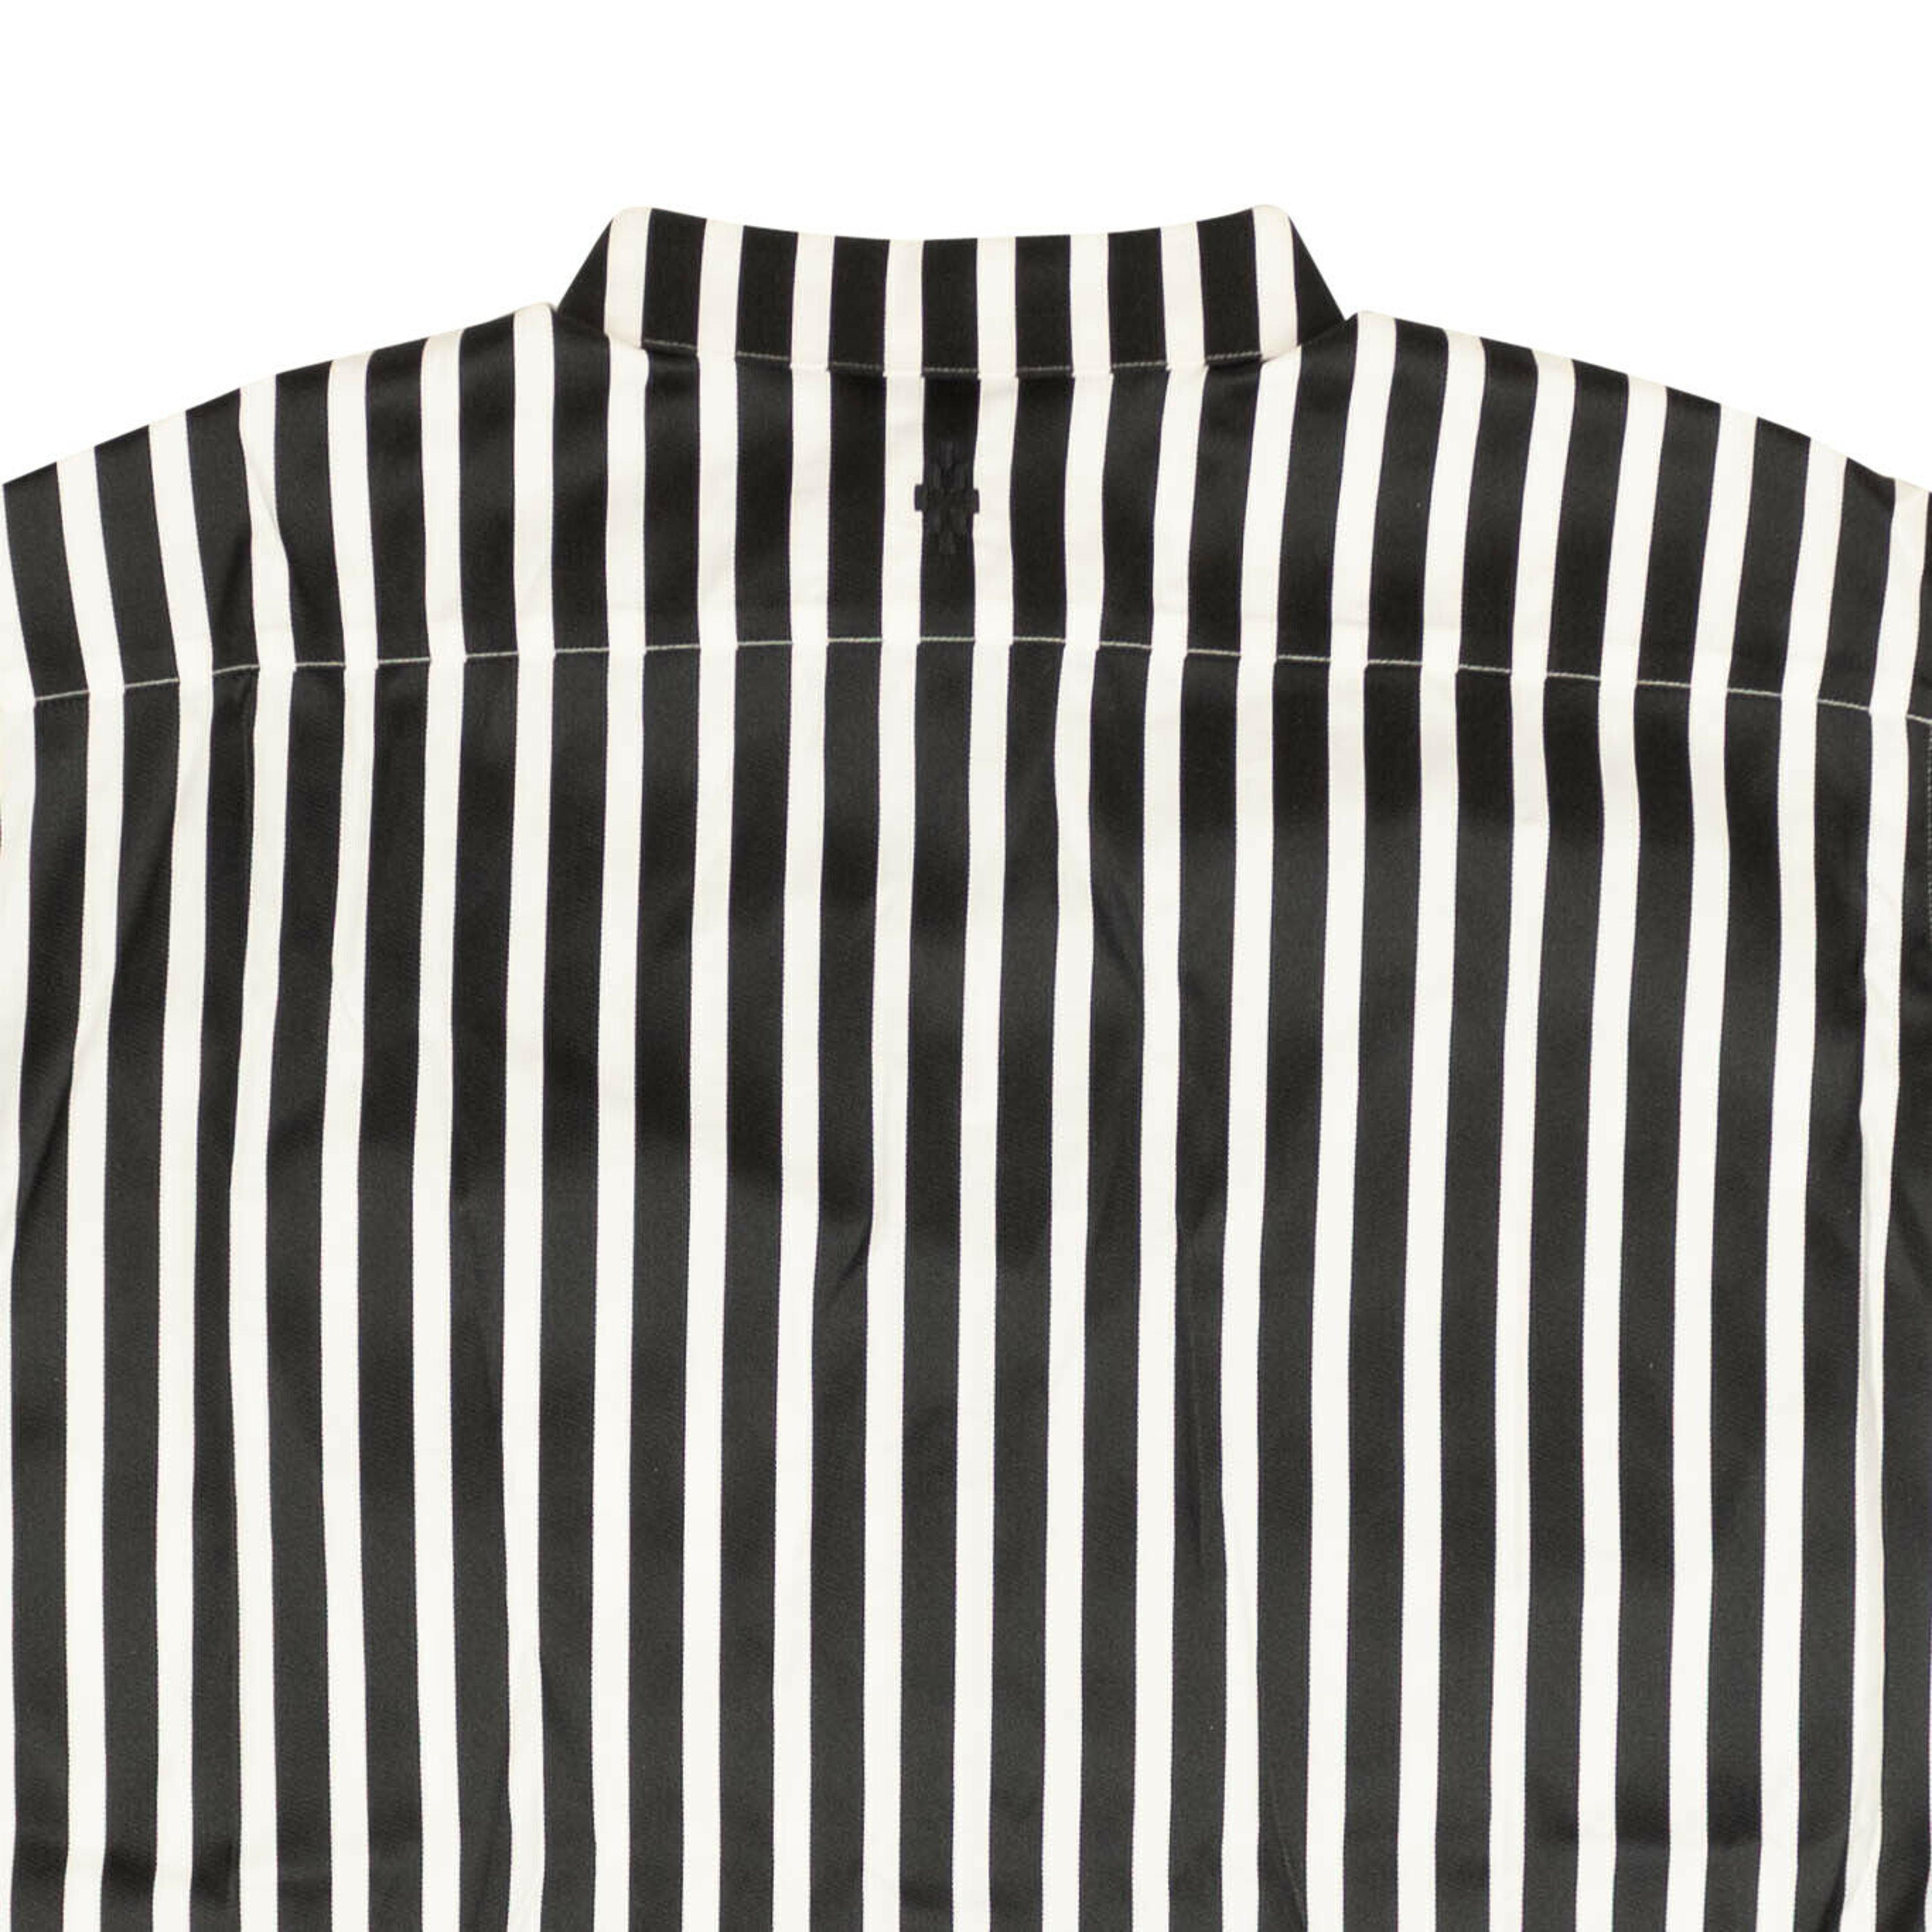 Alternate View 3 of Black And White Striped Confidencial Shirt